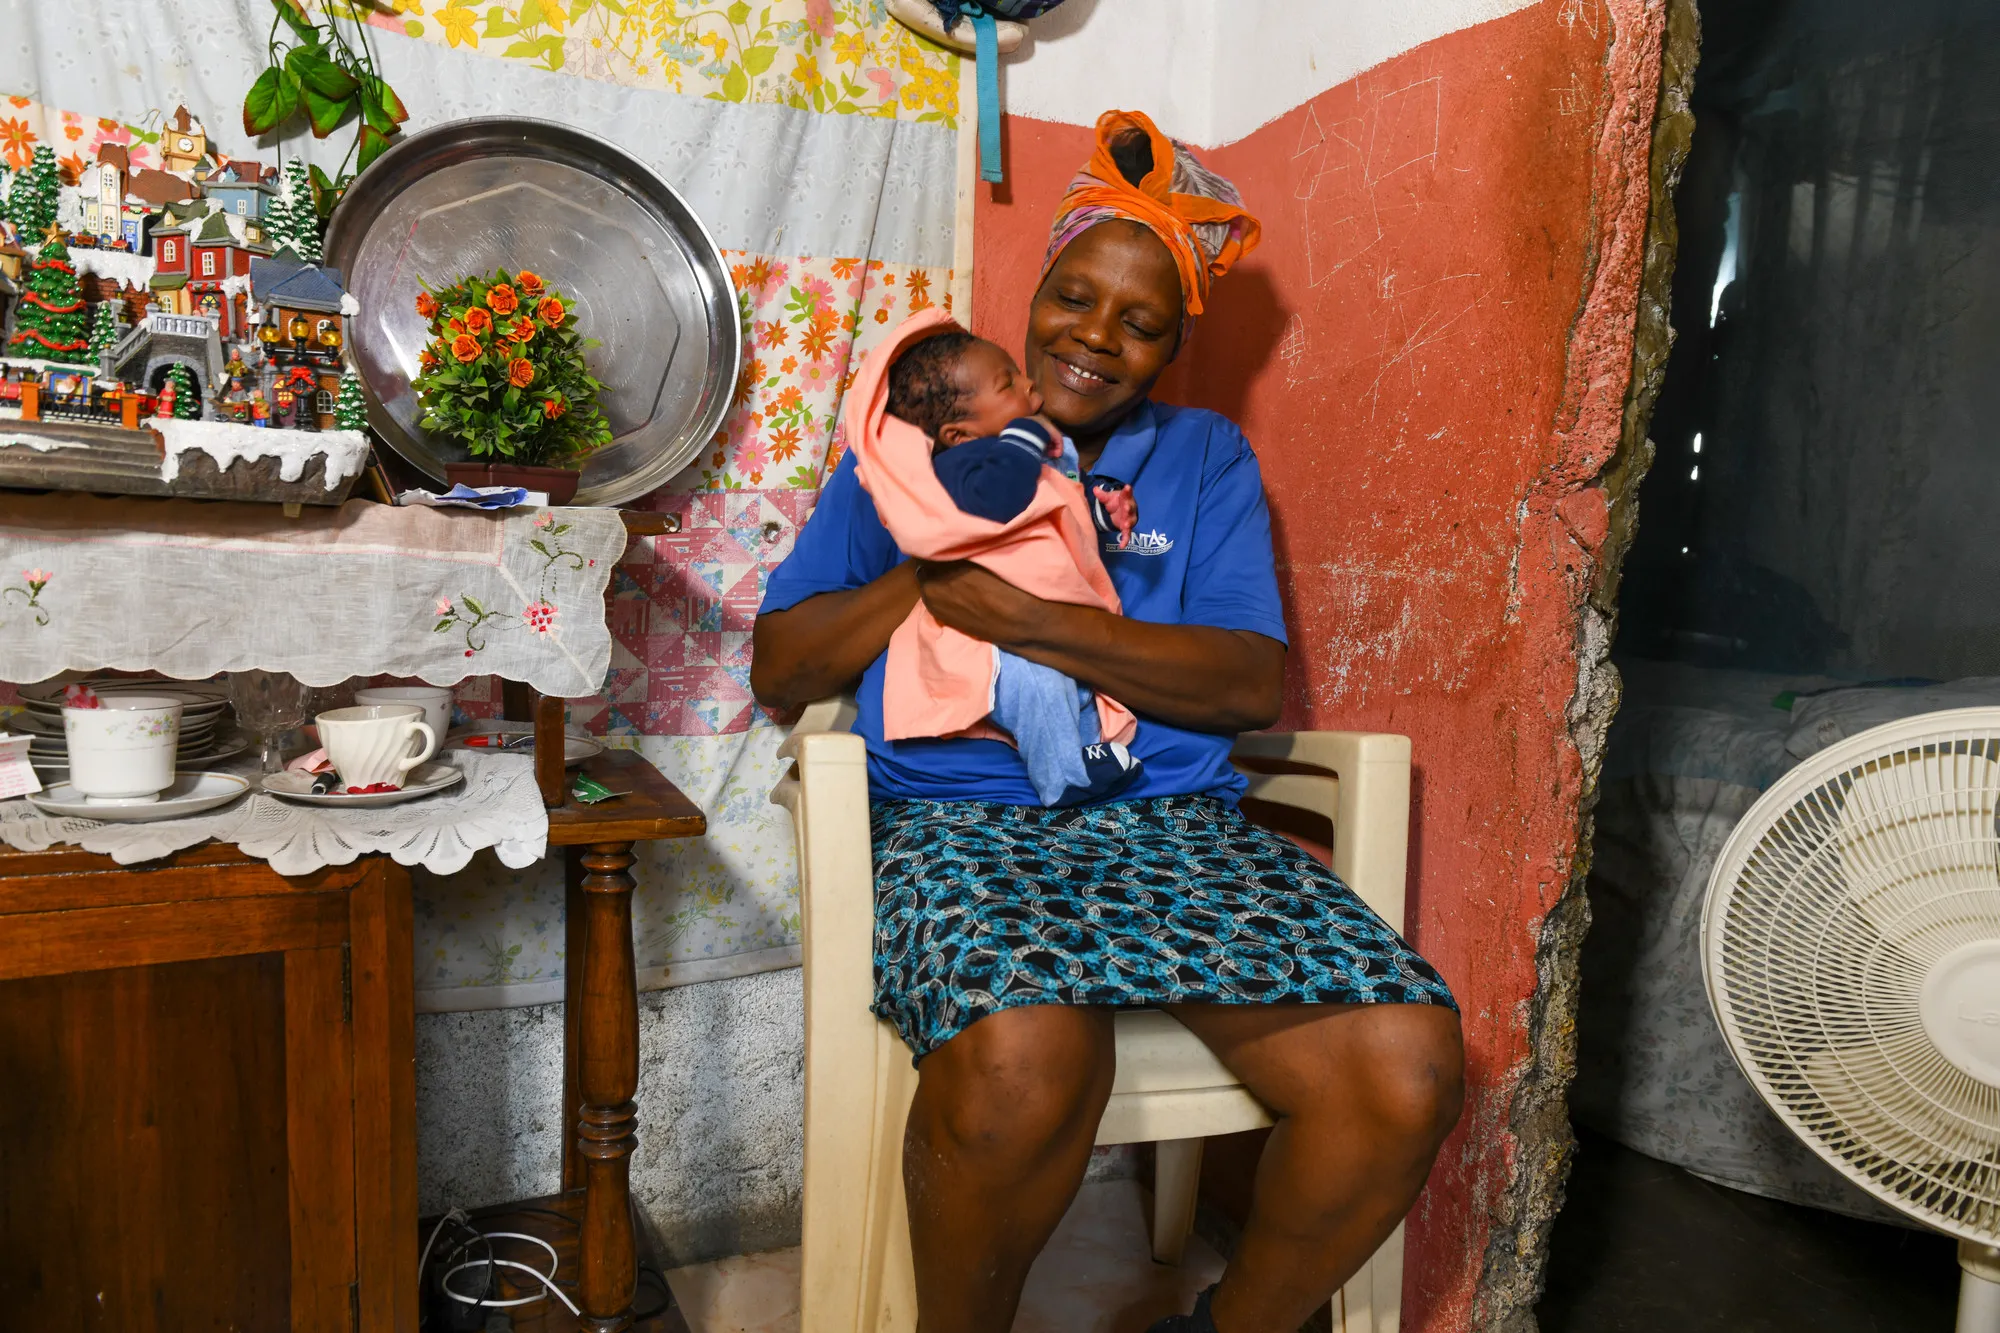 Natacha Louis and her child photographed in Haiti after an earthquake wrecked havoc in the Grand-Anse region in Southn Haiti earlier in August.